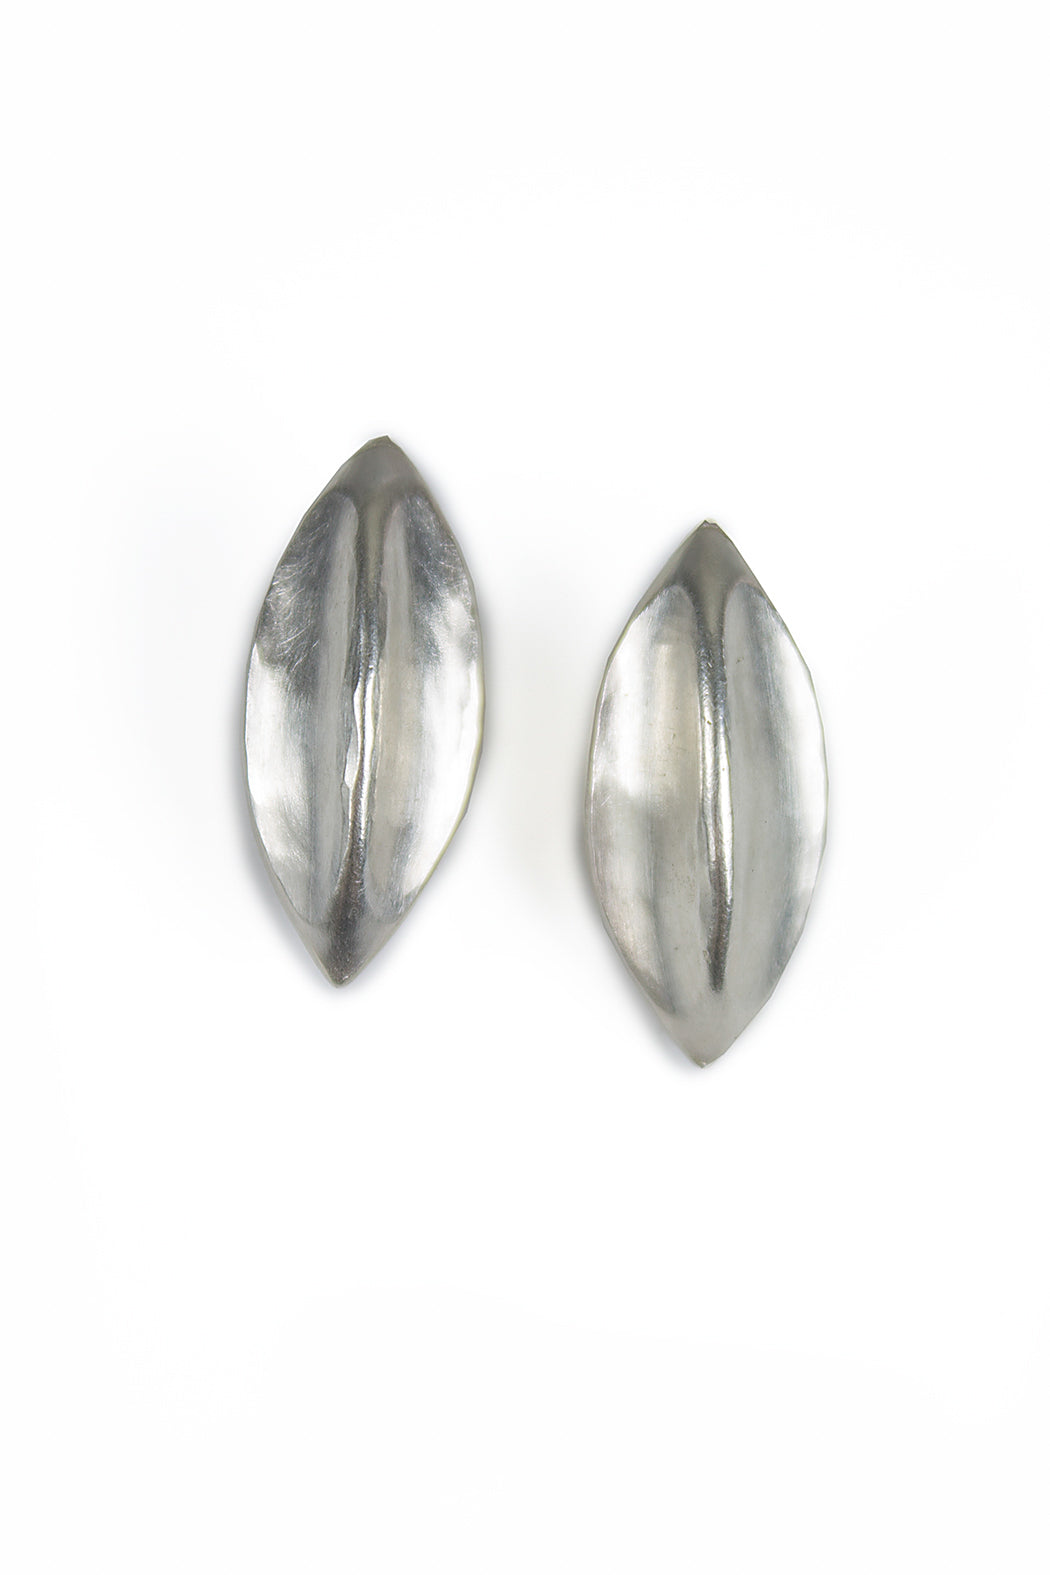 A009.1.1-small Forged Almond Earrings